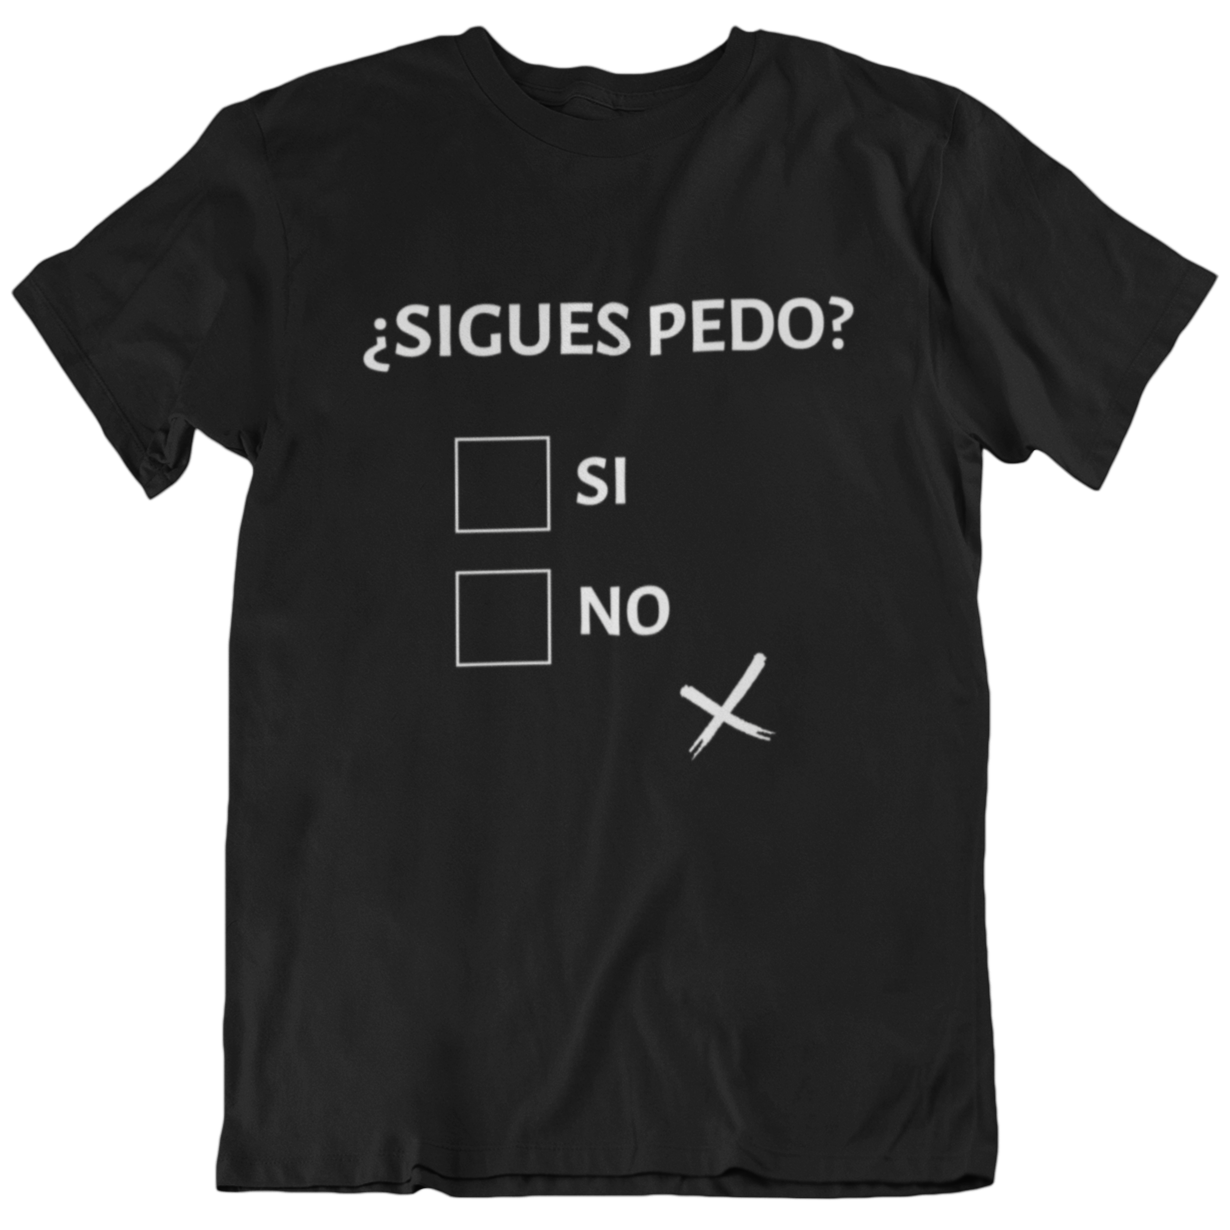 Latino mens T-shirt design with text "sigues pedo?" and checkboxes "si" and "no", "no" box attempted to be marked with an "x" but off center, implying drunkenness